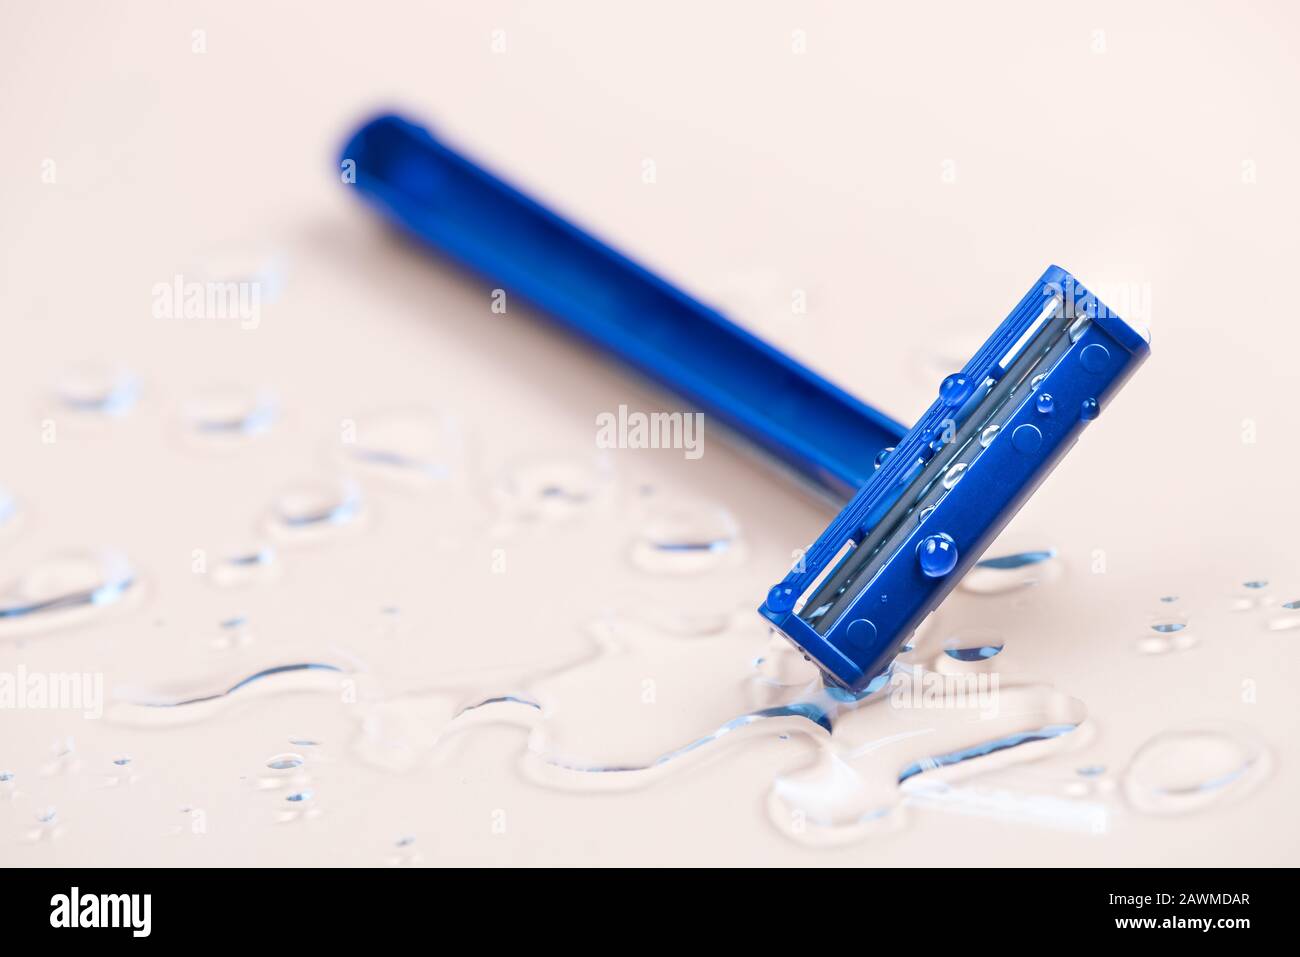 shaving razor on wet pastel background with water drops Stock Photo